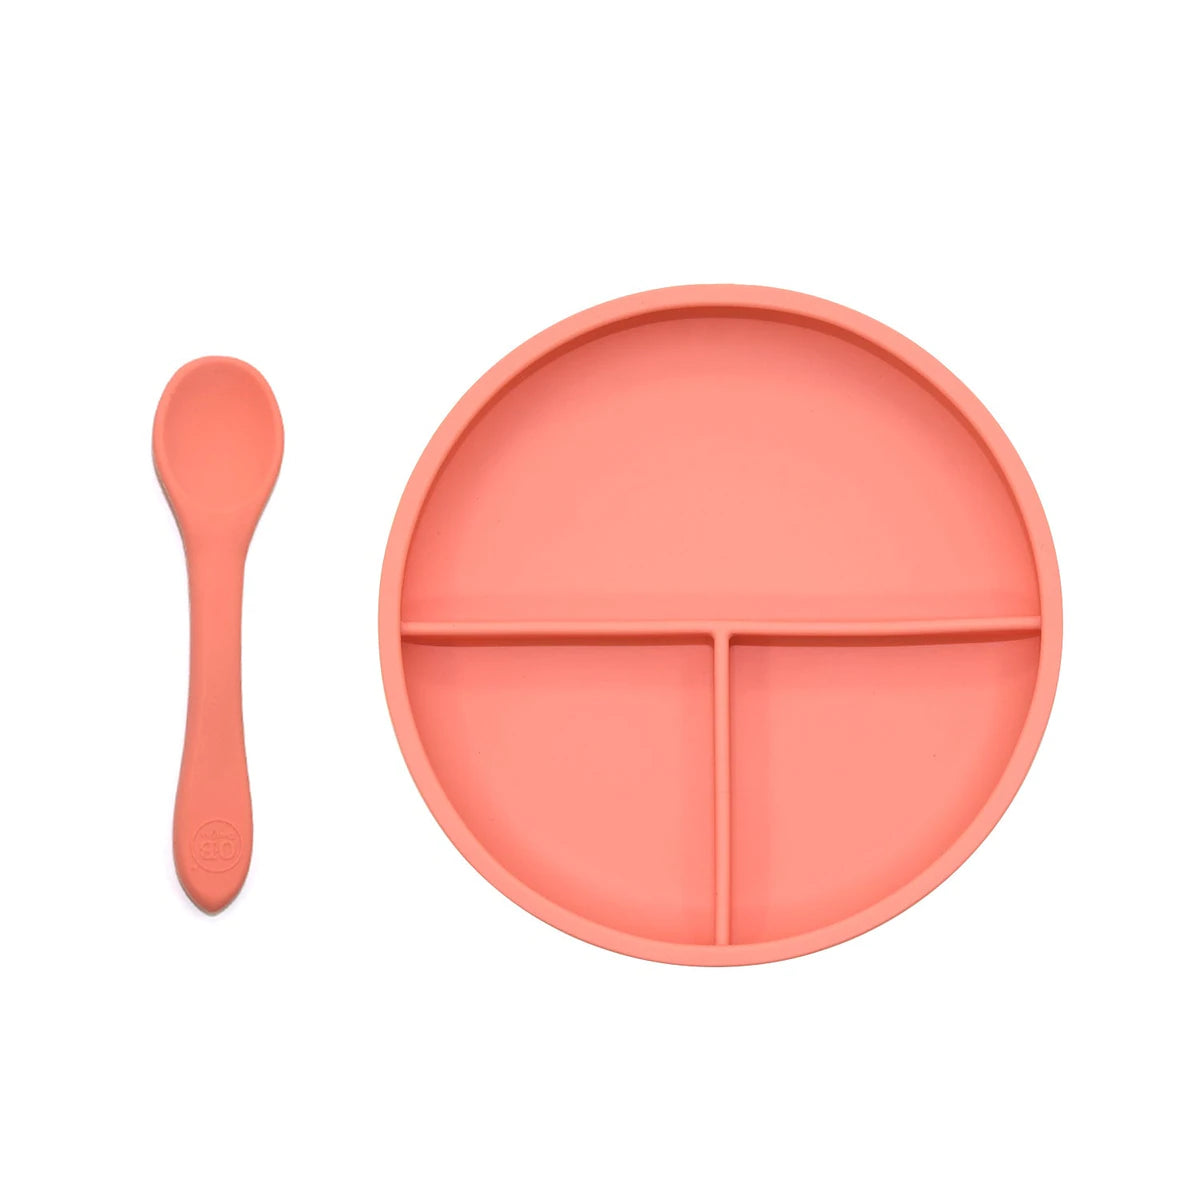 O.B Design | Silicone Suction Divider Plate & Spoon Set